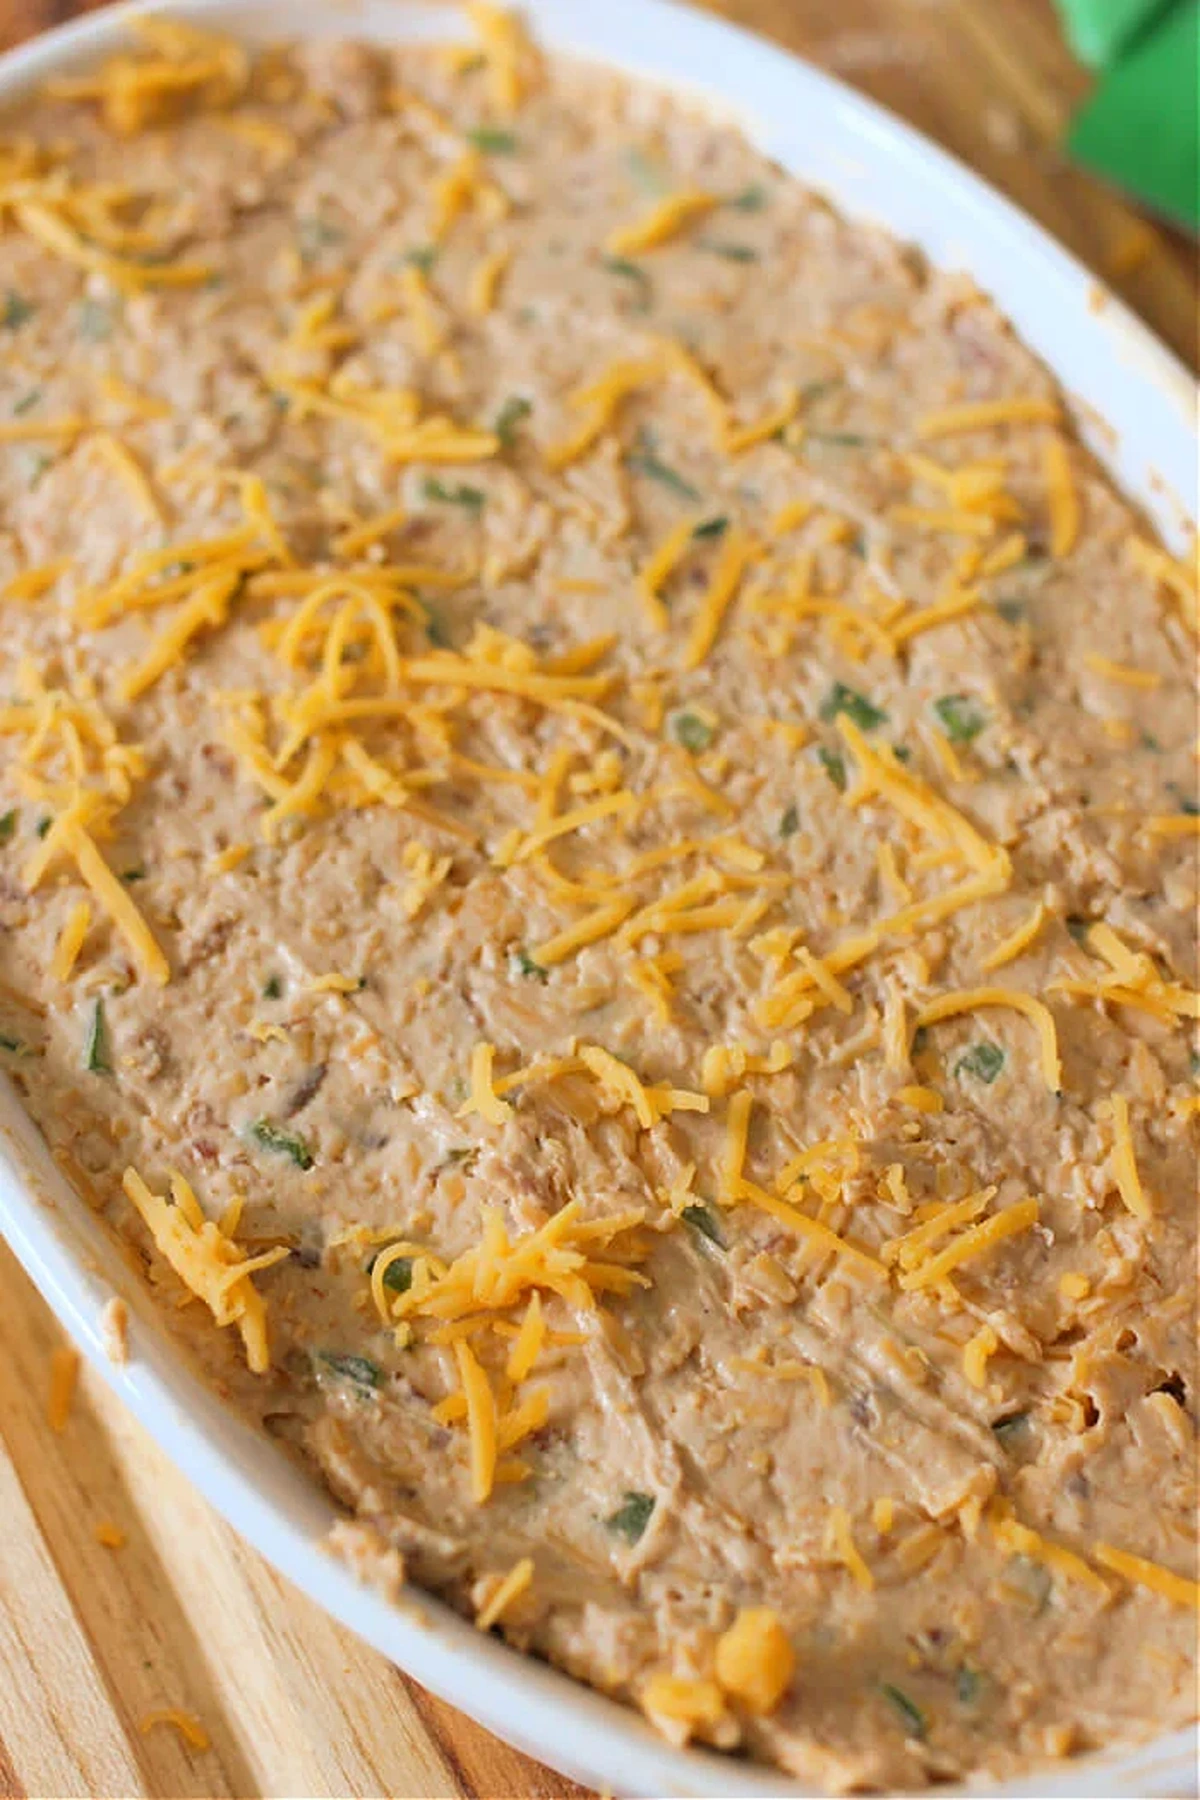 Super Bowl dip made from jalapeno popper ingredients.